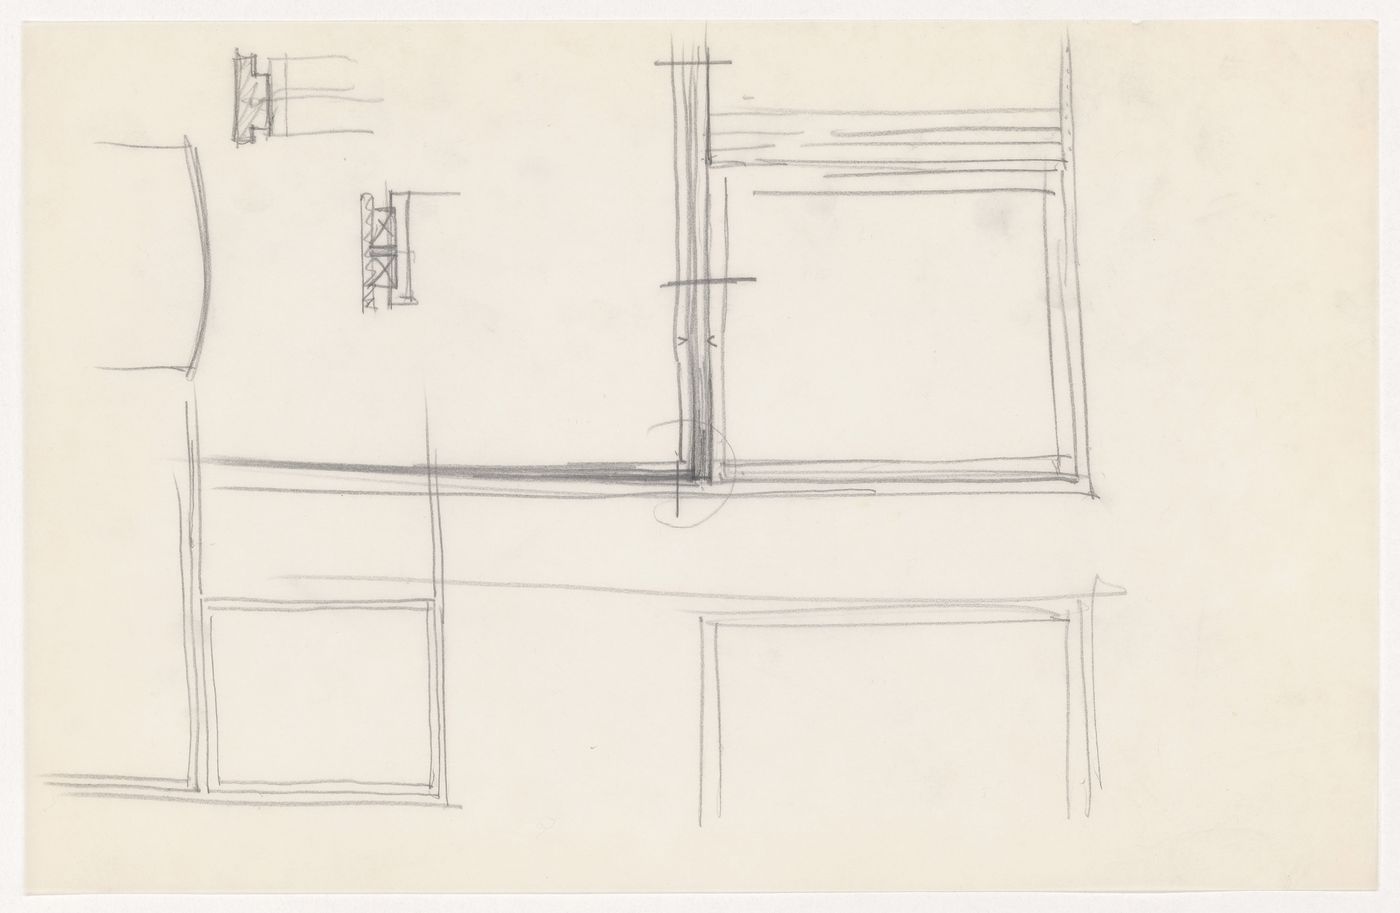 Partial sketch elevations for window glazing, with sketch sectional details for the Metallurgy Building, Illinois Institute of Technology, Chicago